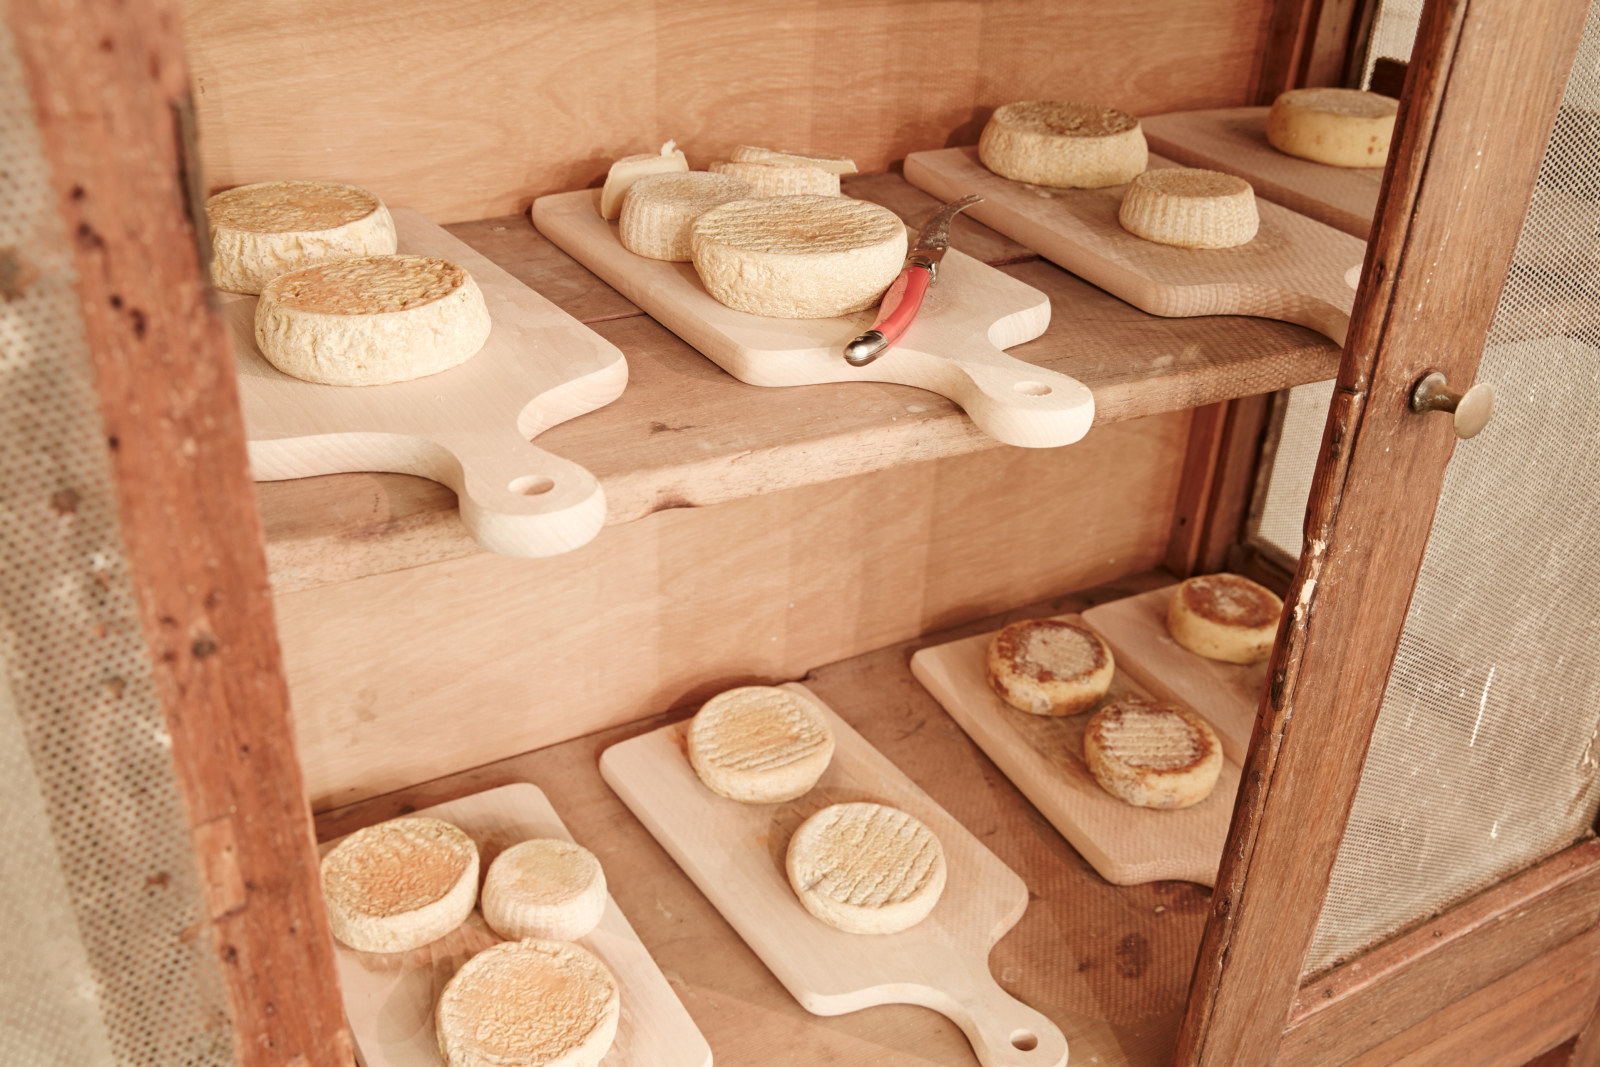 Soft cheeses made by Kristen Allan, ripening on boards in a food safe.